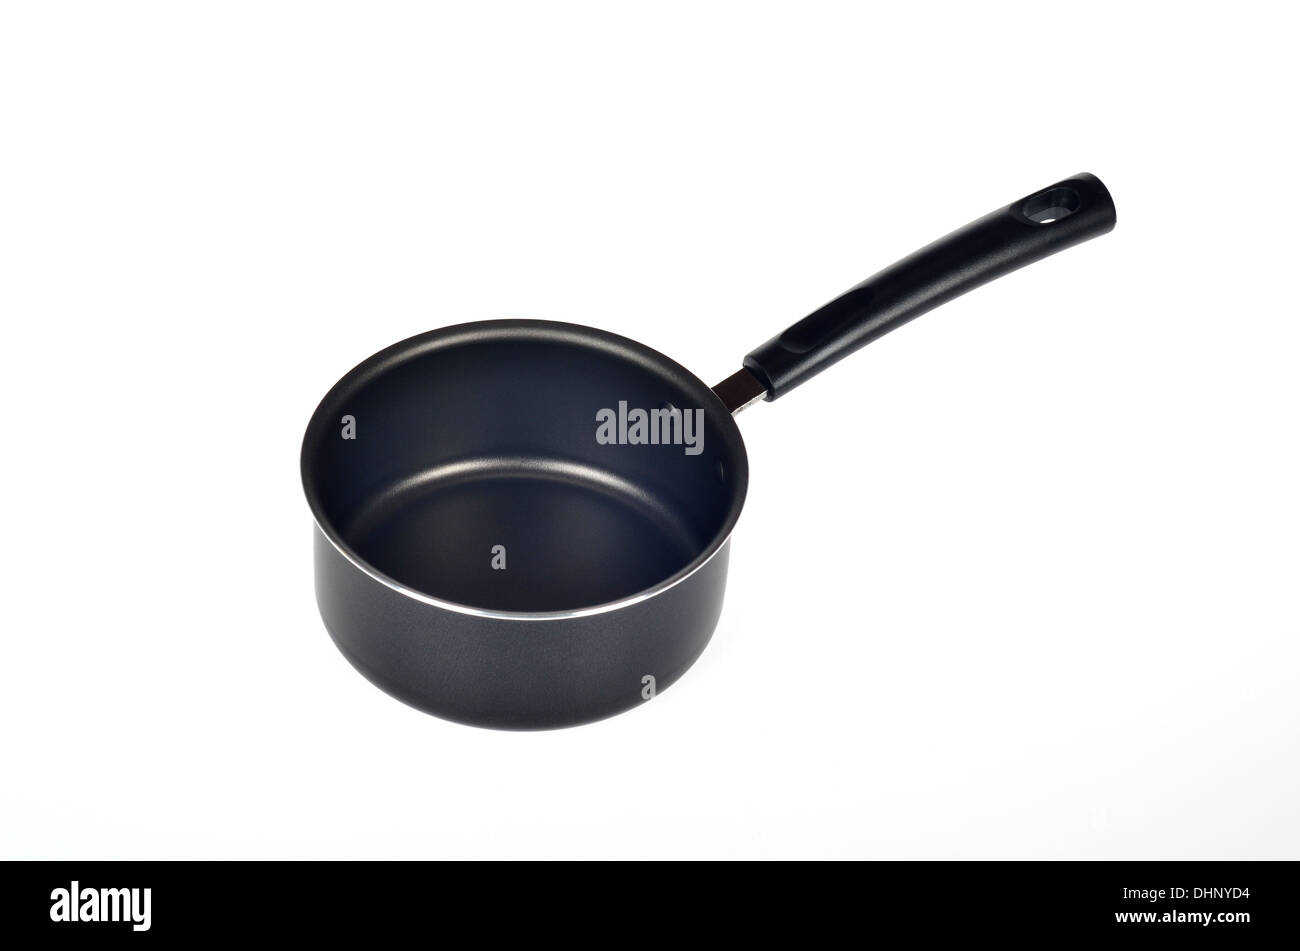 Empty black cooking pot or sauce pan with handle on white background, cutout. Stock Photo